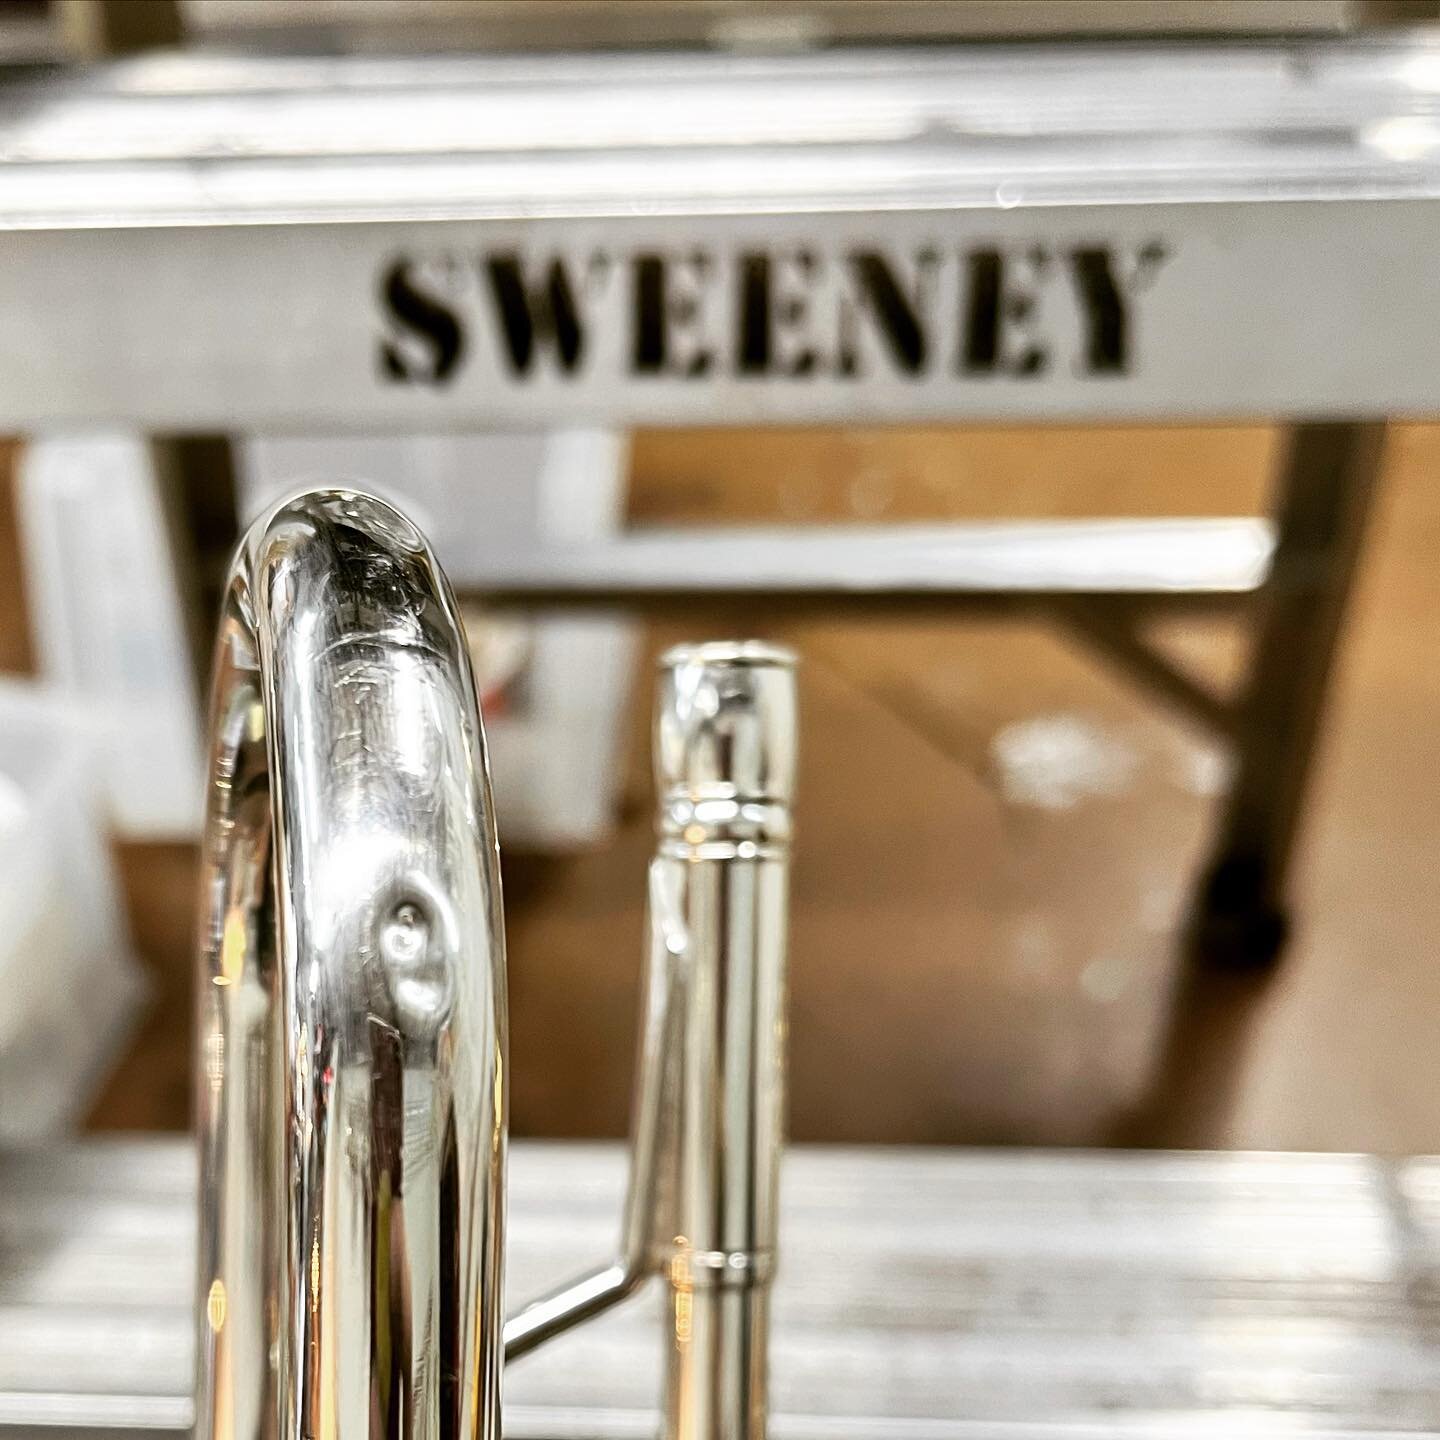 It&rsquo;s not much, but those dents are outta here! 

#brass
#ifixbrass
#sweeneybrass
#trumpet
#trombone 
#horn
#dent
#fixit
#doneright 
#raleigh
#shopcat